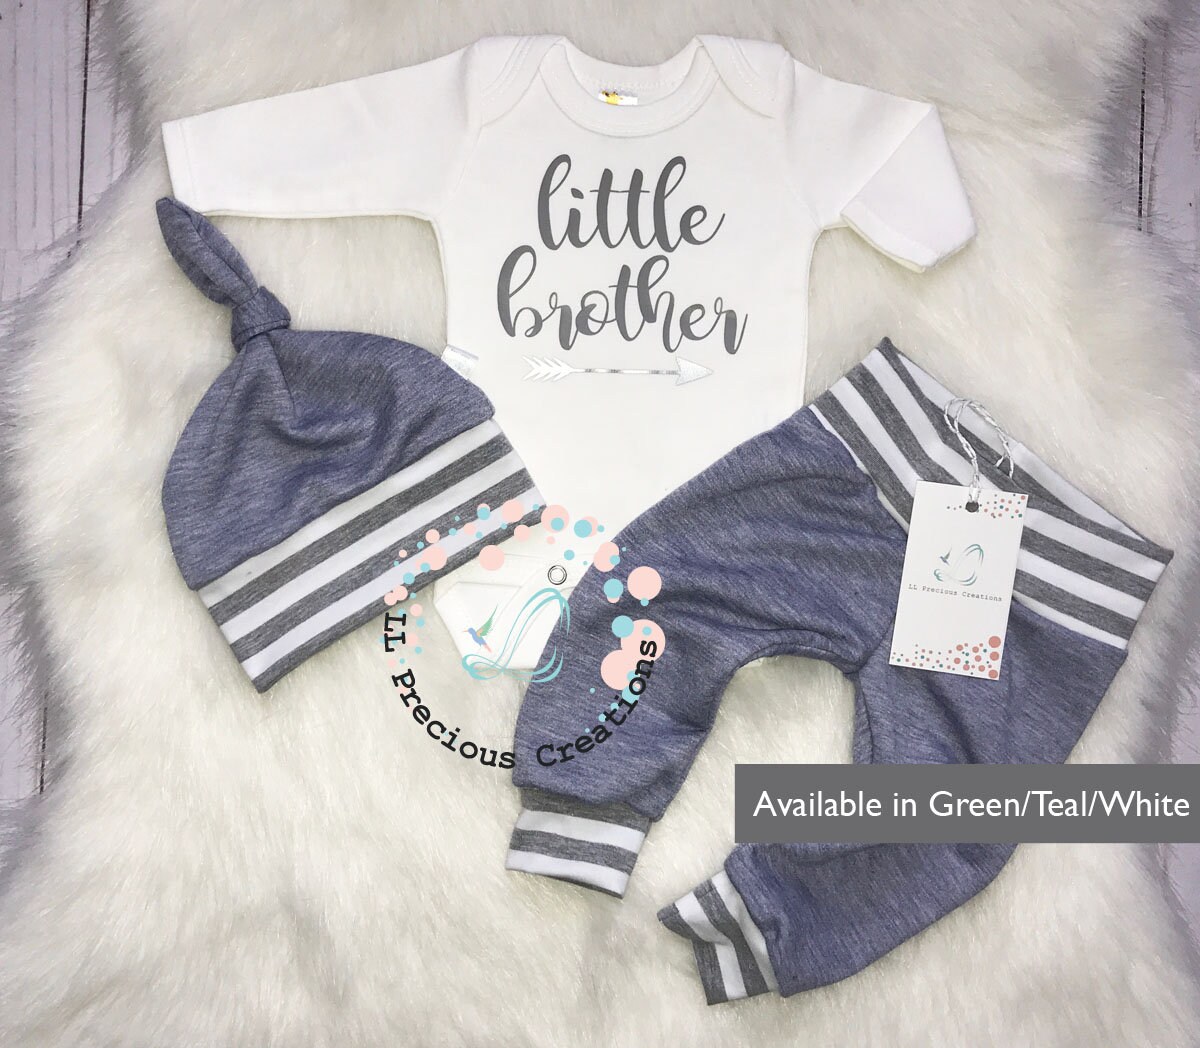 Little Brother Outfit Take Home Baby Boy Outfit  Newborn Set  Baby Boy Outfit  Newborn Boy Clothes  Baby Shower Gift  Photo Prop Kleding Jongenskleding Babykleding voor jongens Kledingsets 